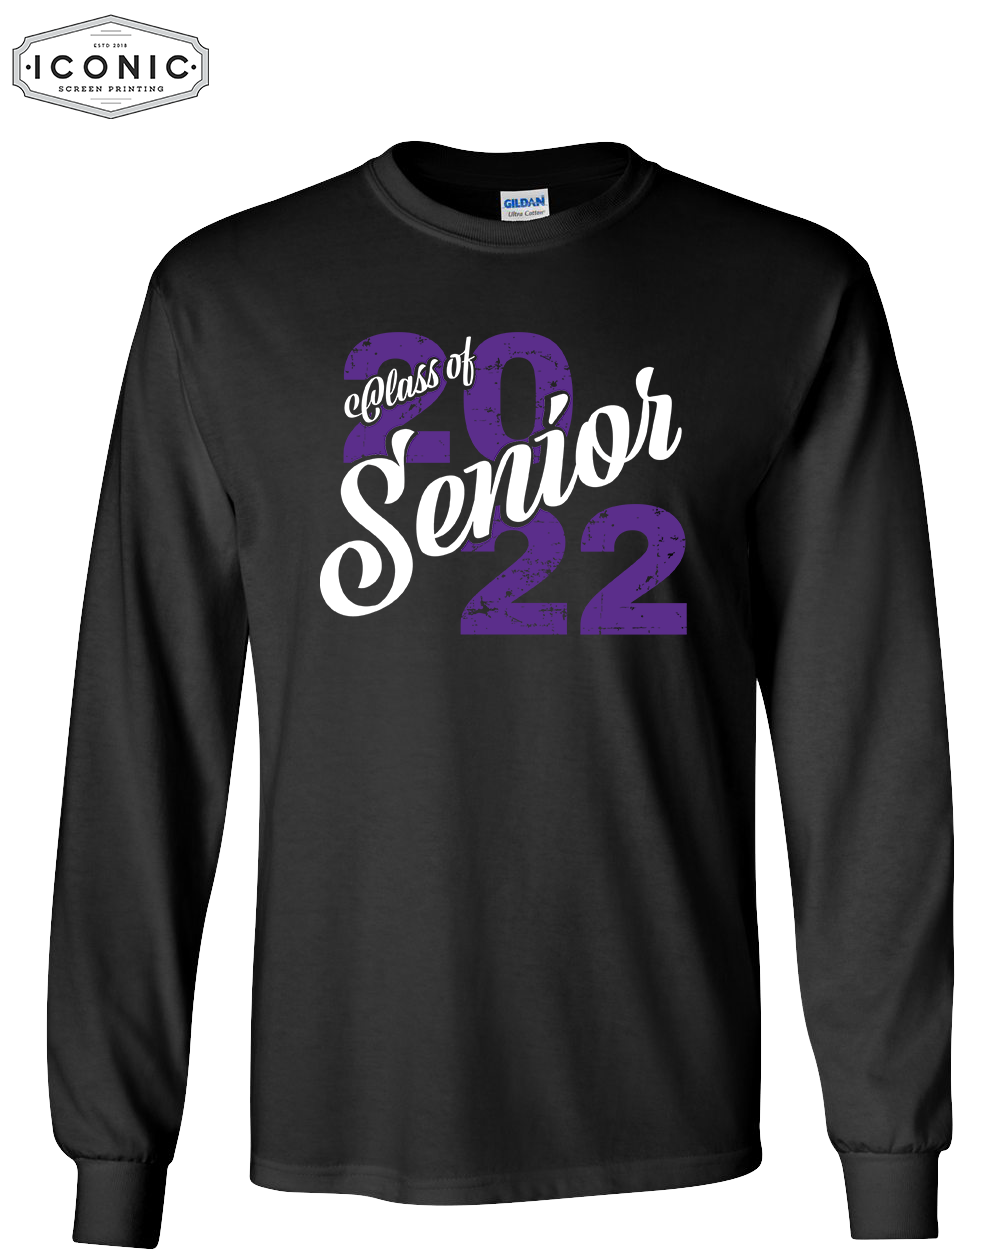 Class of YEAR - Ultra Cotton Long Sleeve